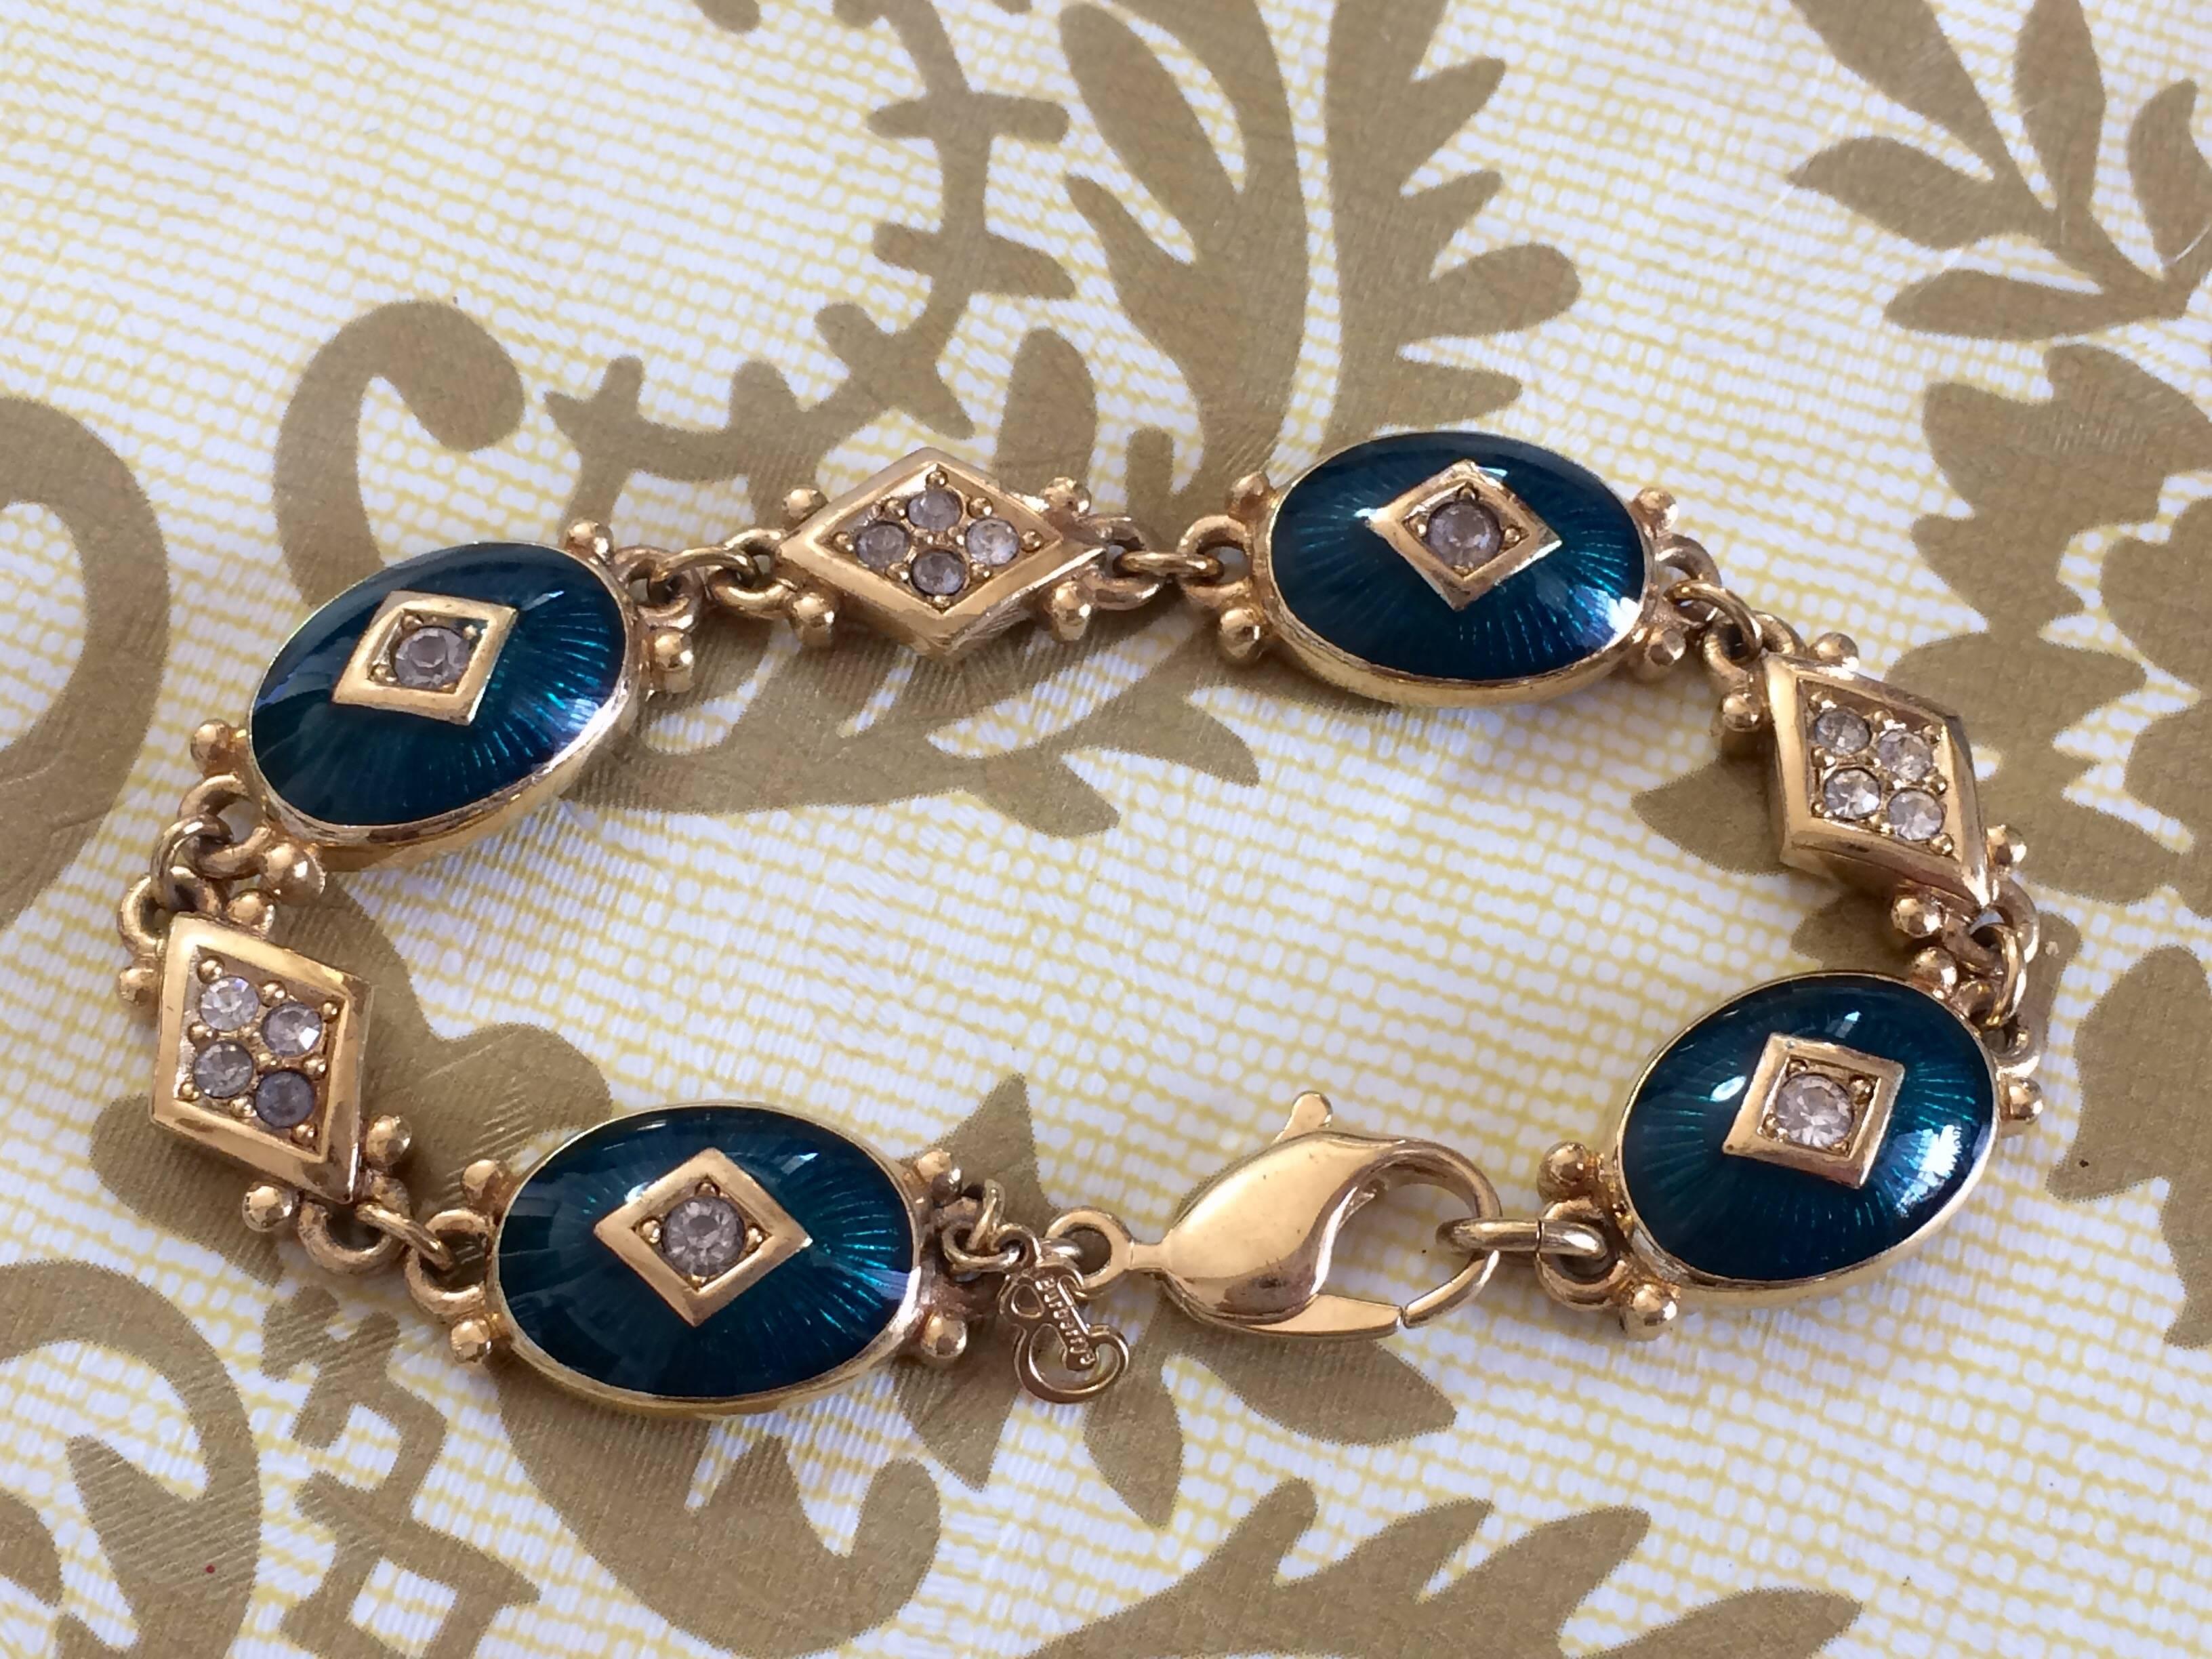 1990s. Vintage Burberrys golden gorgeous bracelet with oval emerald green and diamond shape charms with rhinestone crystals. Burberry jewelry.

Here is another beautiful vintage jewelry from Burberry back in the 90's.

Featuring emerald green and